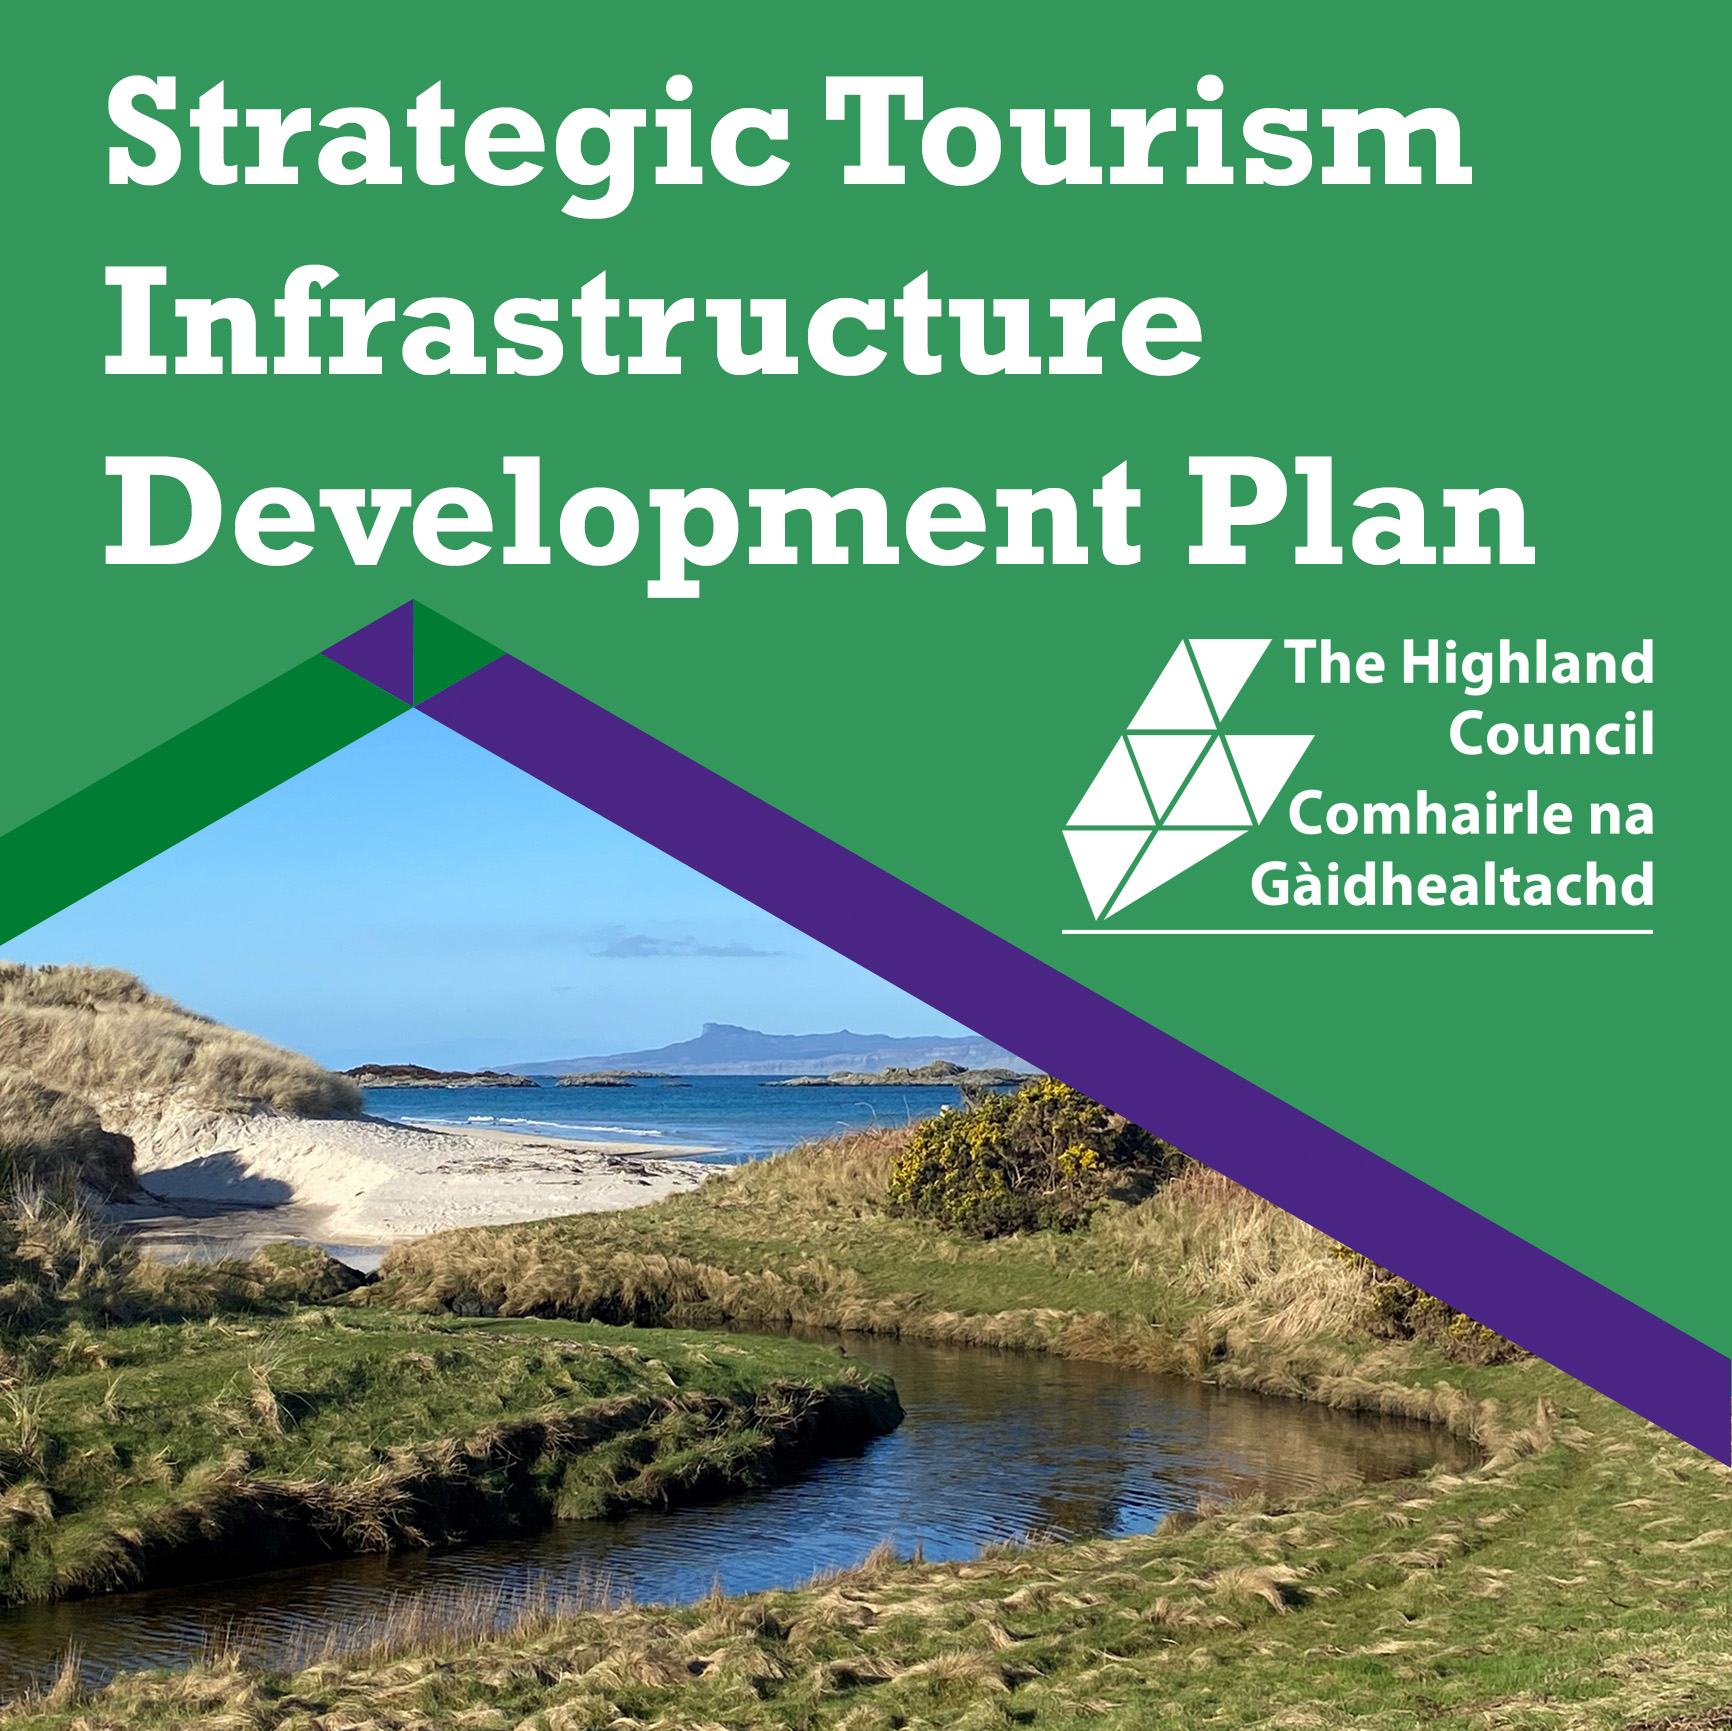 Strategic tourism infrastructure development plan agreed for the Highlands